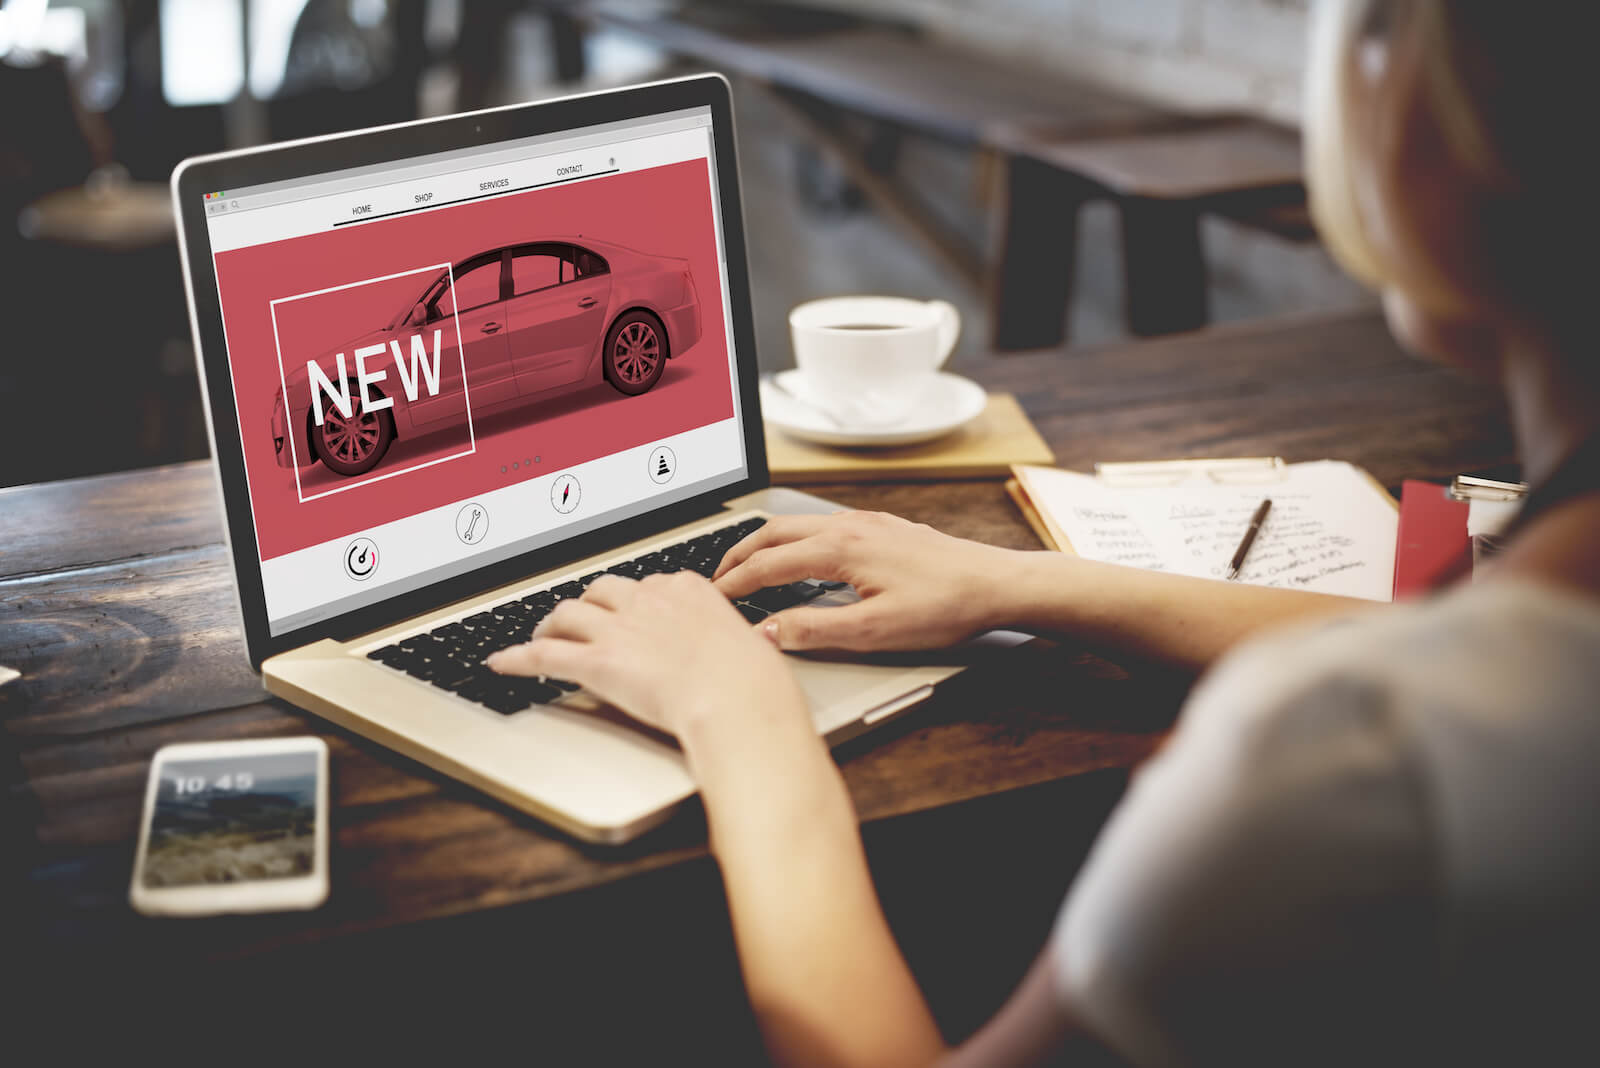 New innovation technology car homepage concept, searching on laptop